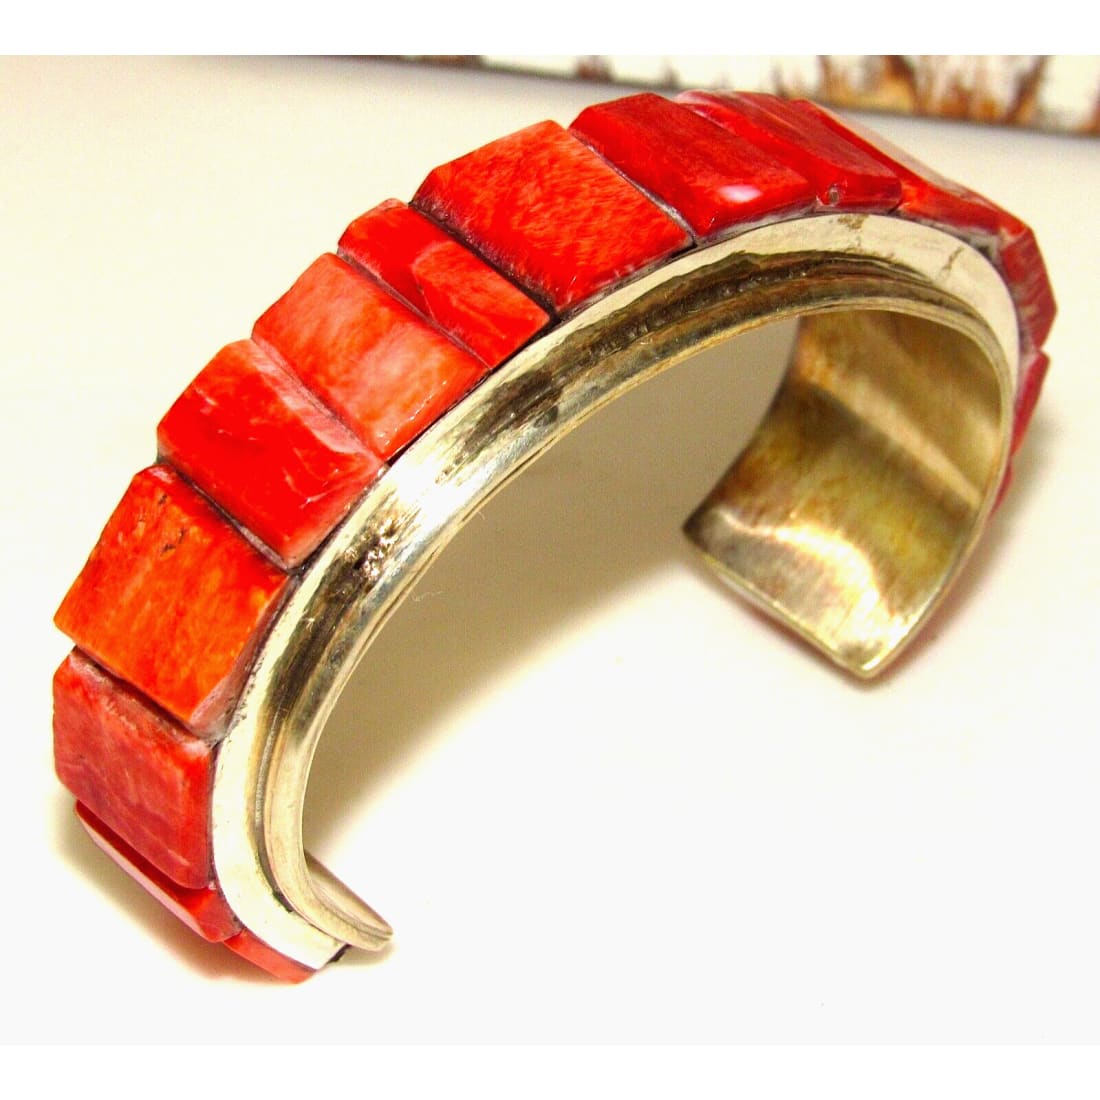 Massive Navajo Inlay Bracelet Red Spiny Sterling Cuff Native